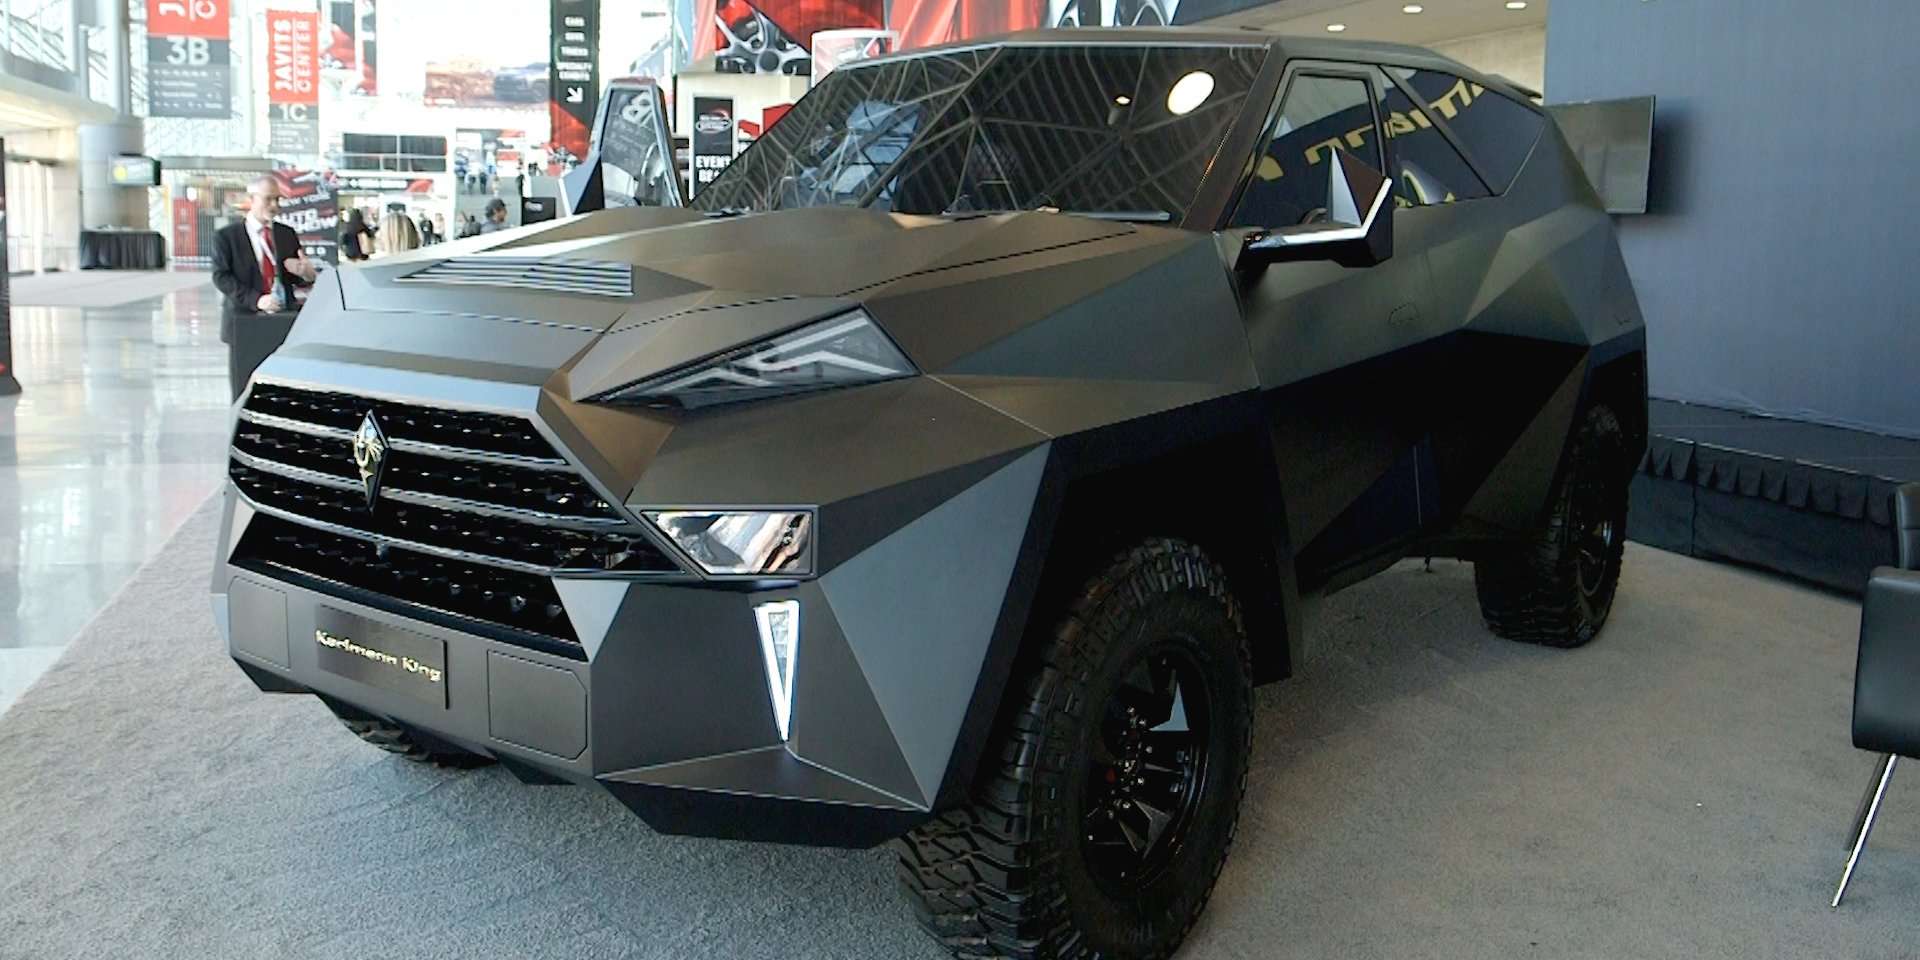 Taboola Ad Example 48852 - The Karlmann King Is A $2 Million Enormous Ultra-luxury SUV Built Upon A Ford F-550